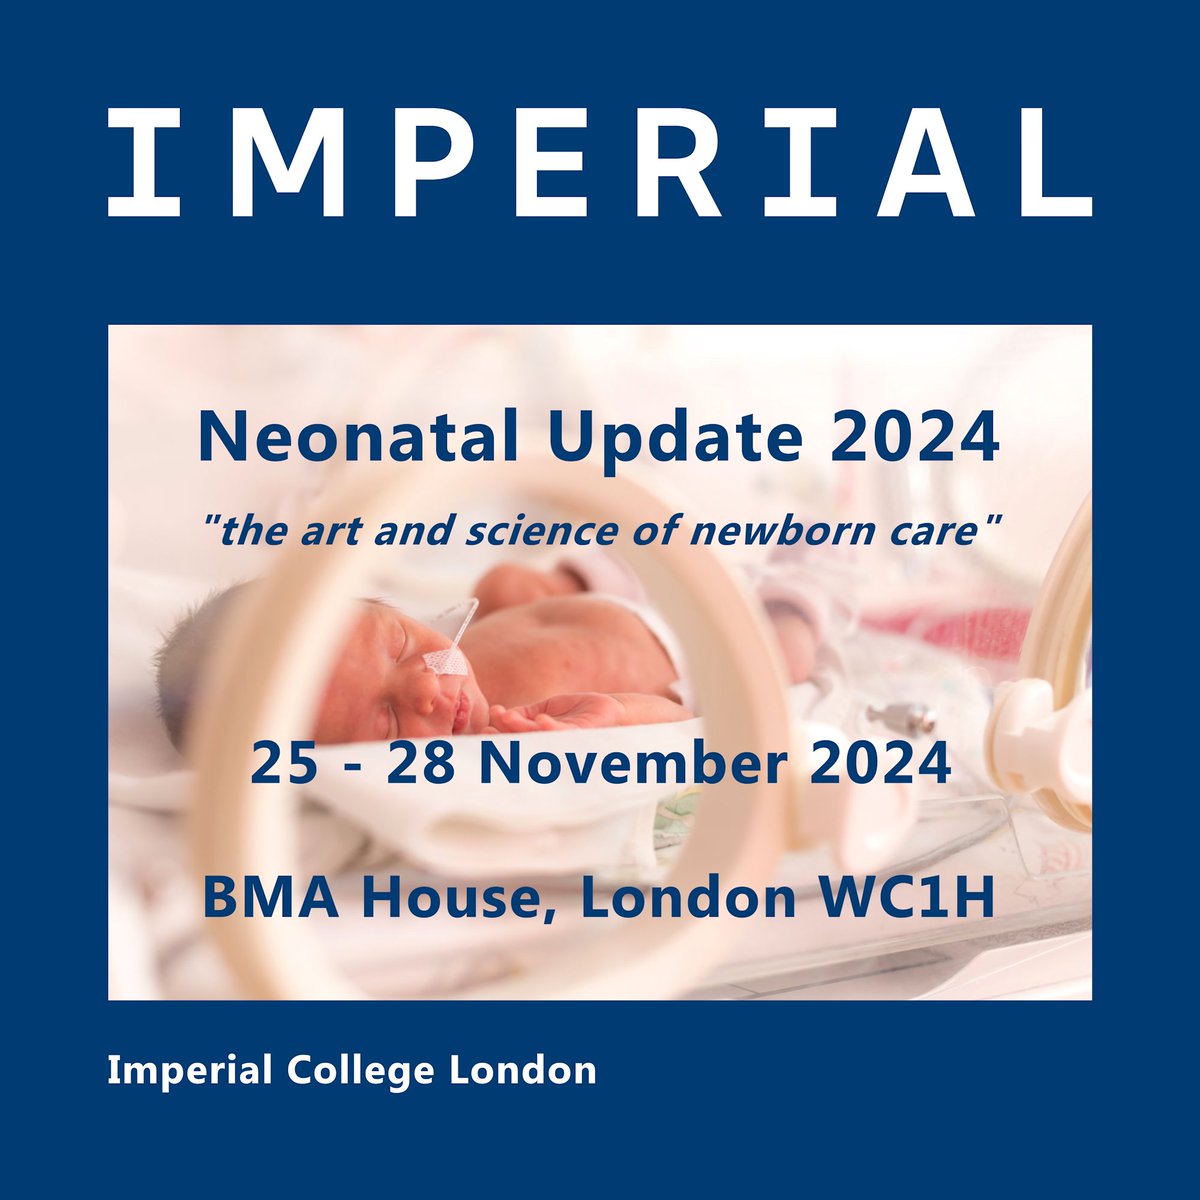 Our Young Investigator Award 2024 is now open for submissions. A great opportunity to present your work to a senior, international audience. Abstract submissions close on July 31. All the details can be found👉bit.ly/NeonatalUpdate… #YIA @RCPCHtweets @imperialcollege #neotwitter